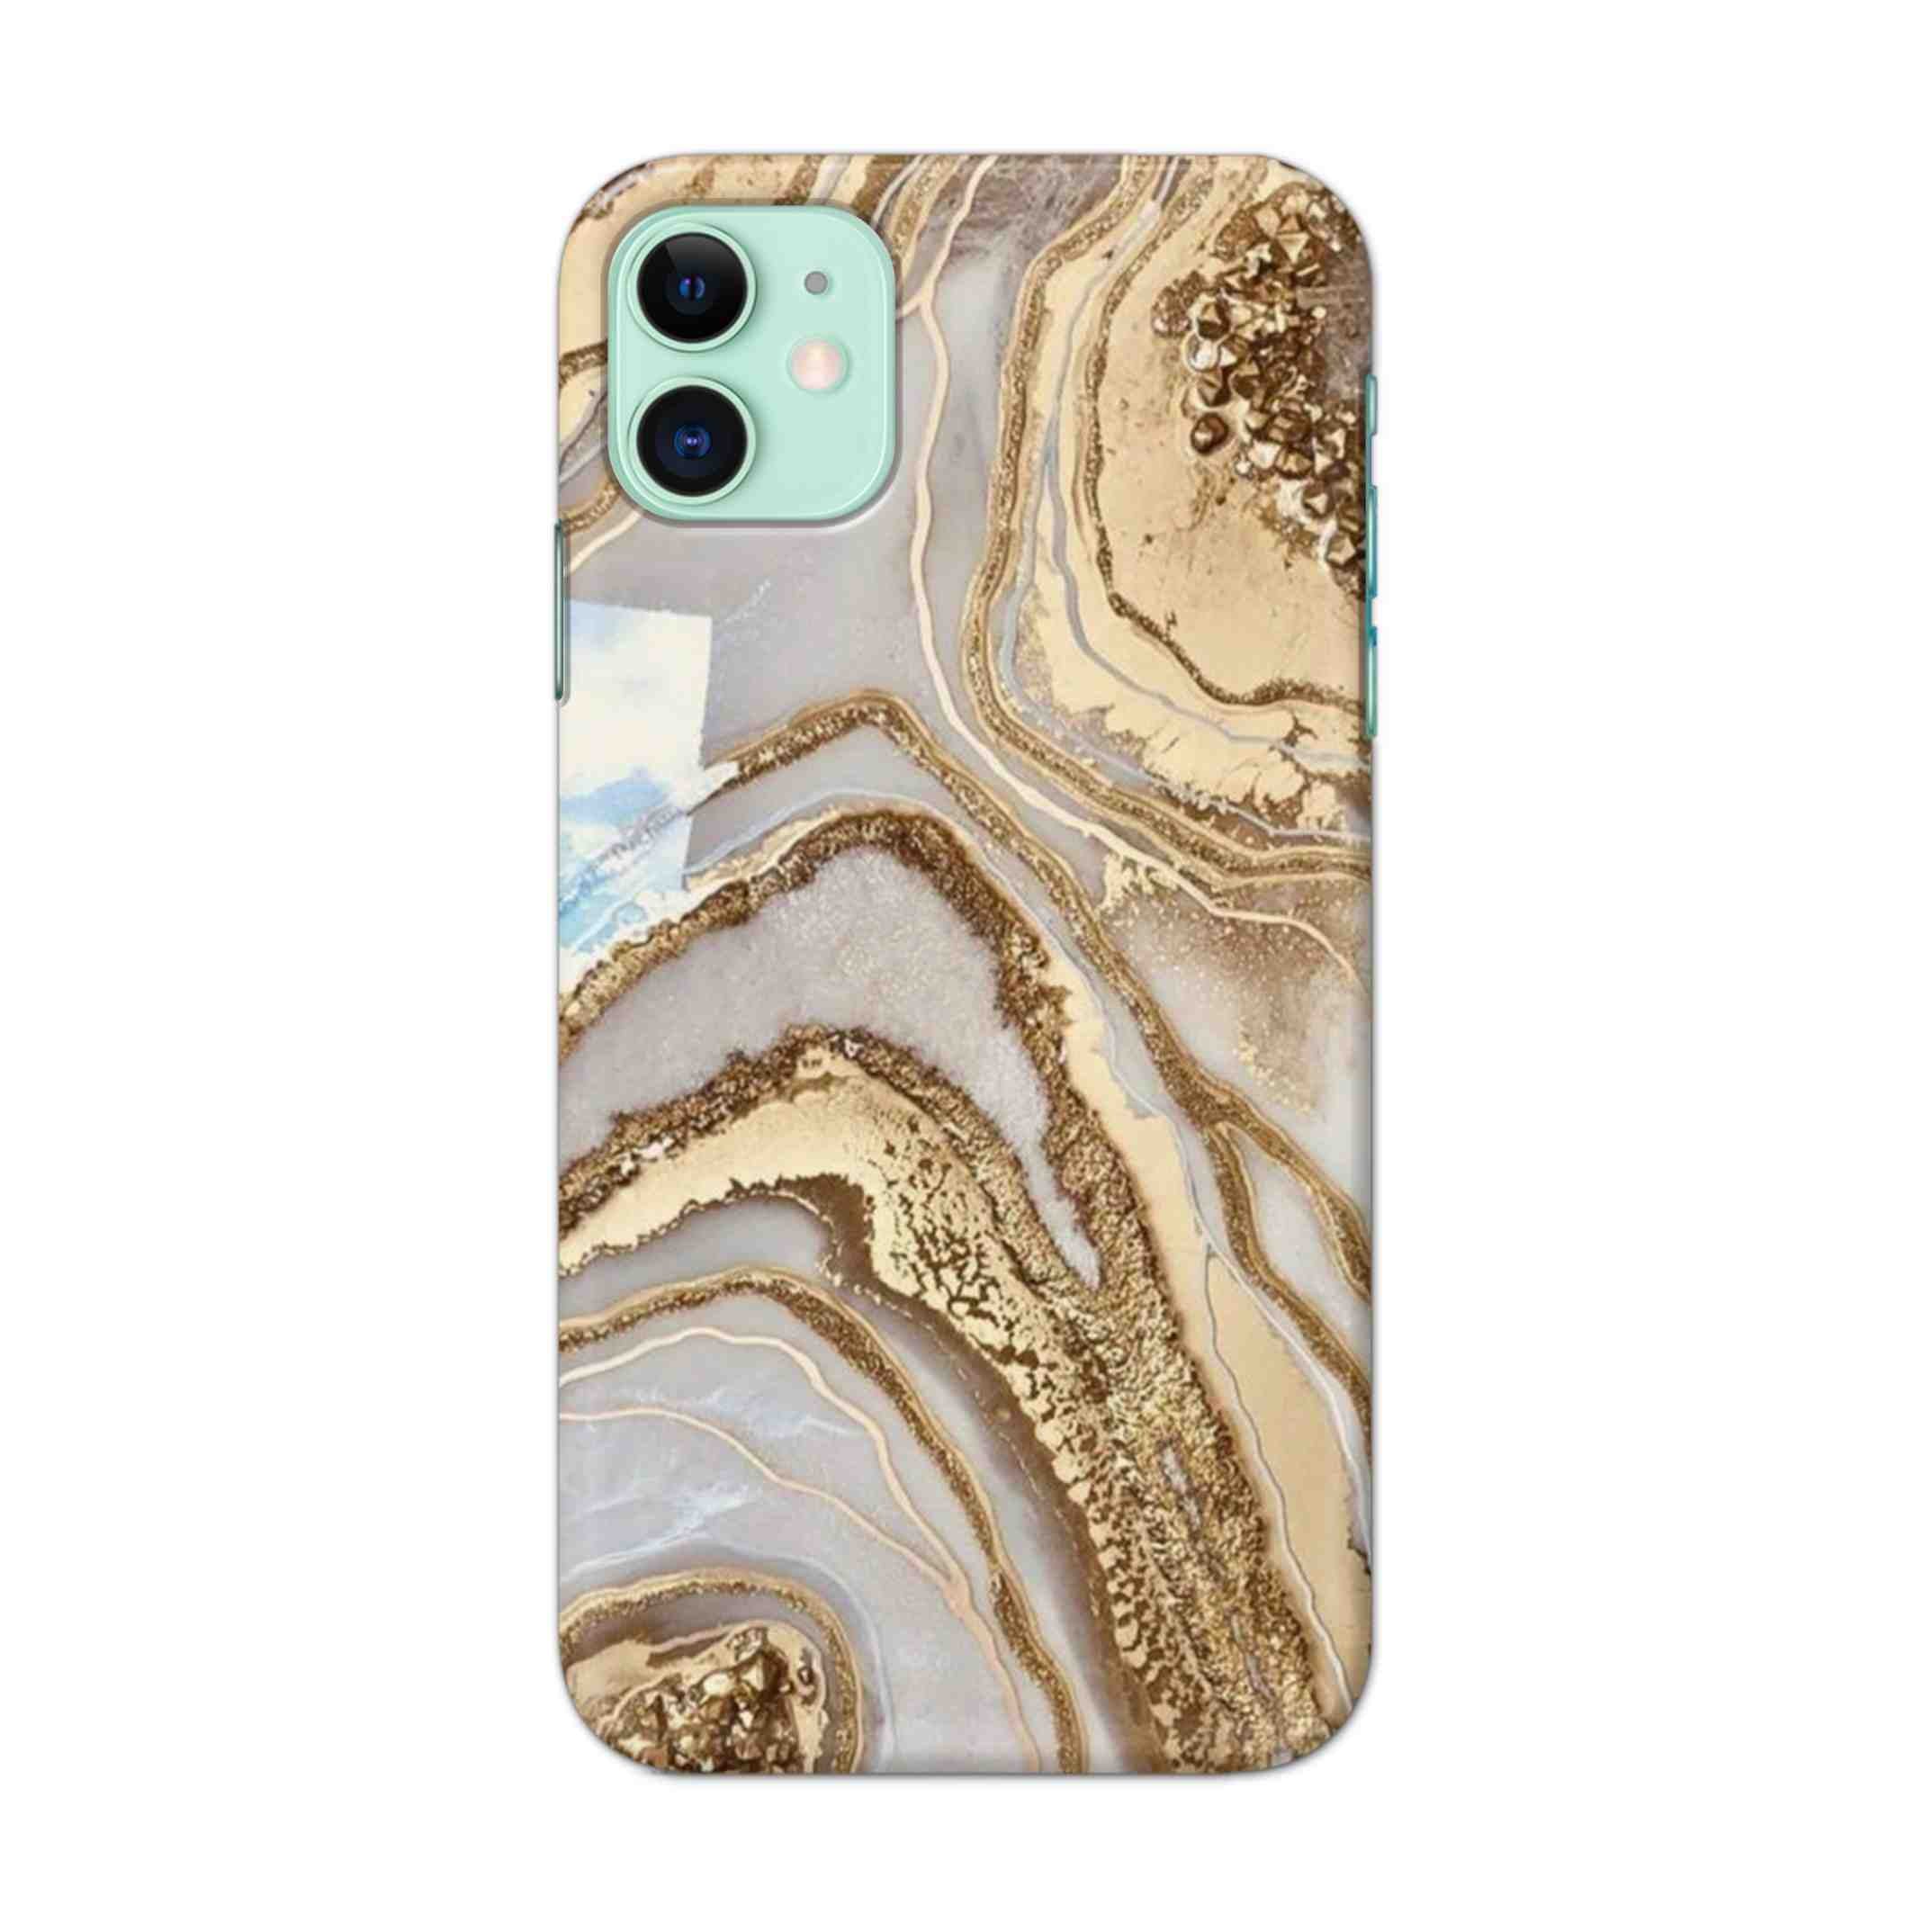 Buy Golden Texture Hard Back Mobile Phone Case Cover For iPhone 11 Online